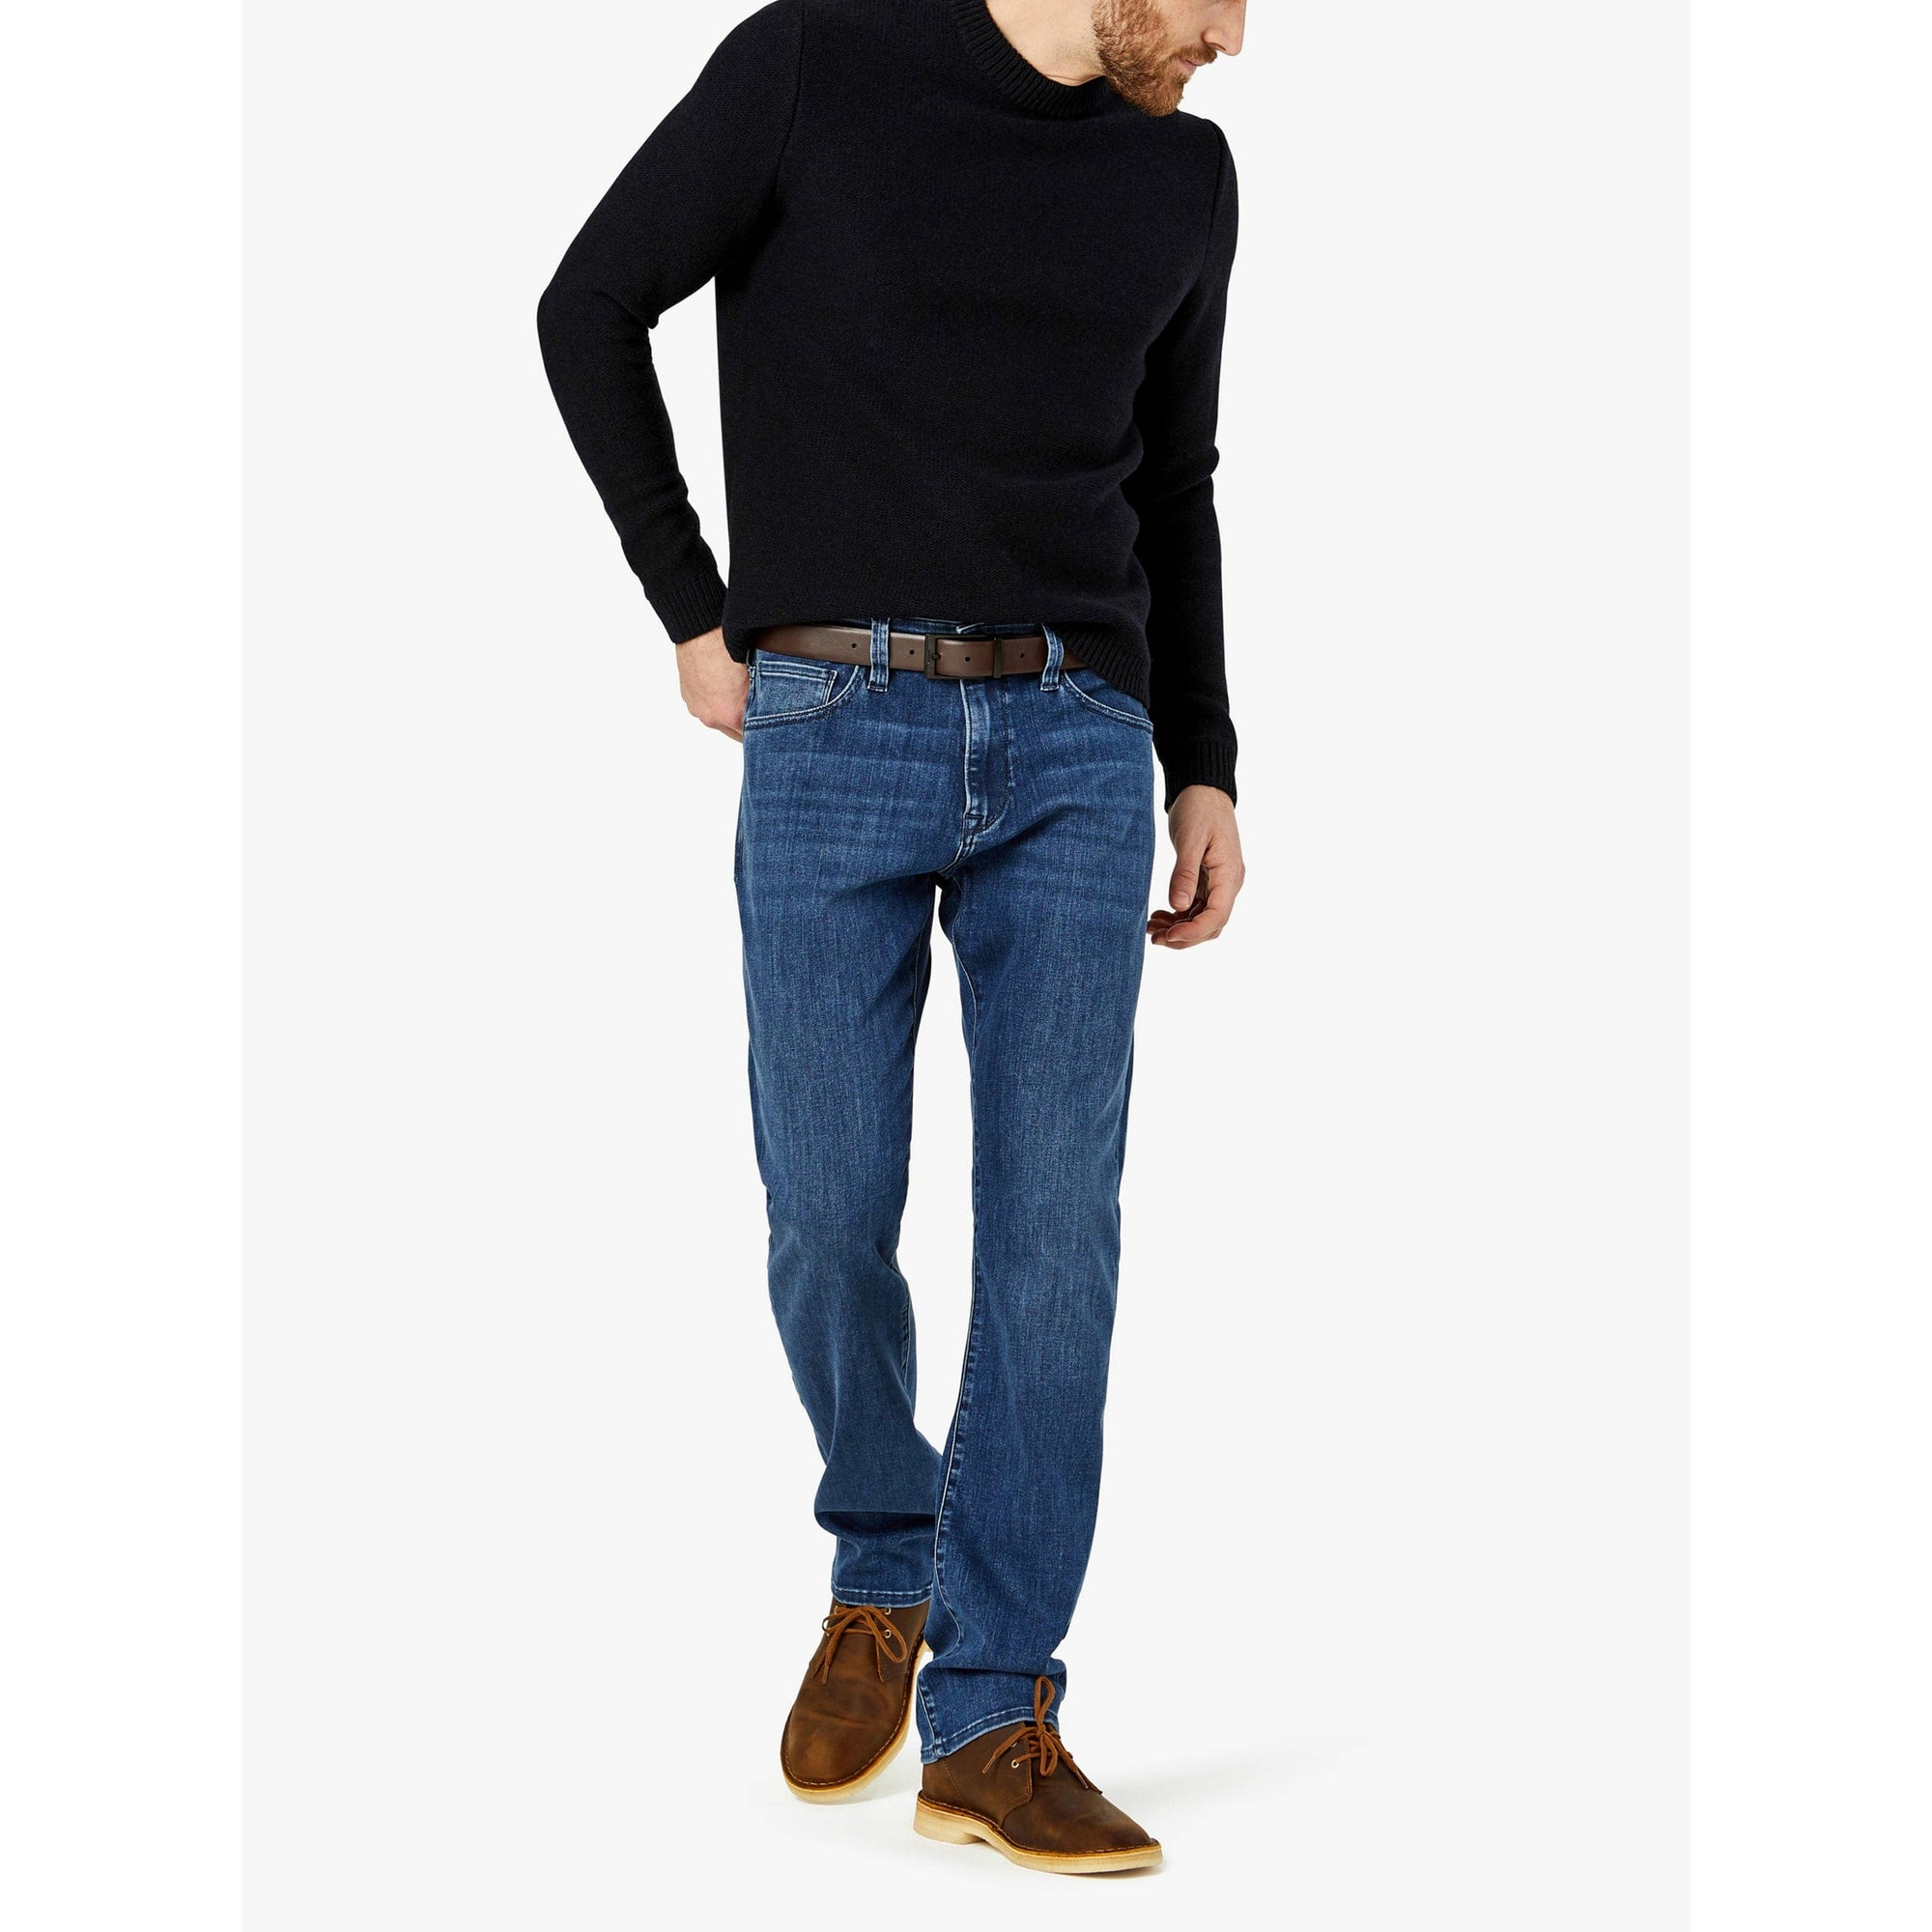 34 HERITAGE Classic Fit Dark Blue Refined Jeans